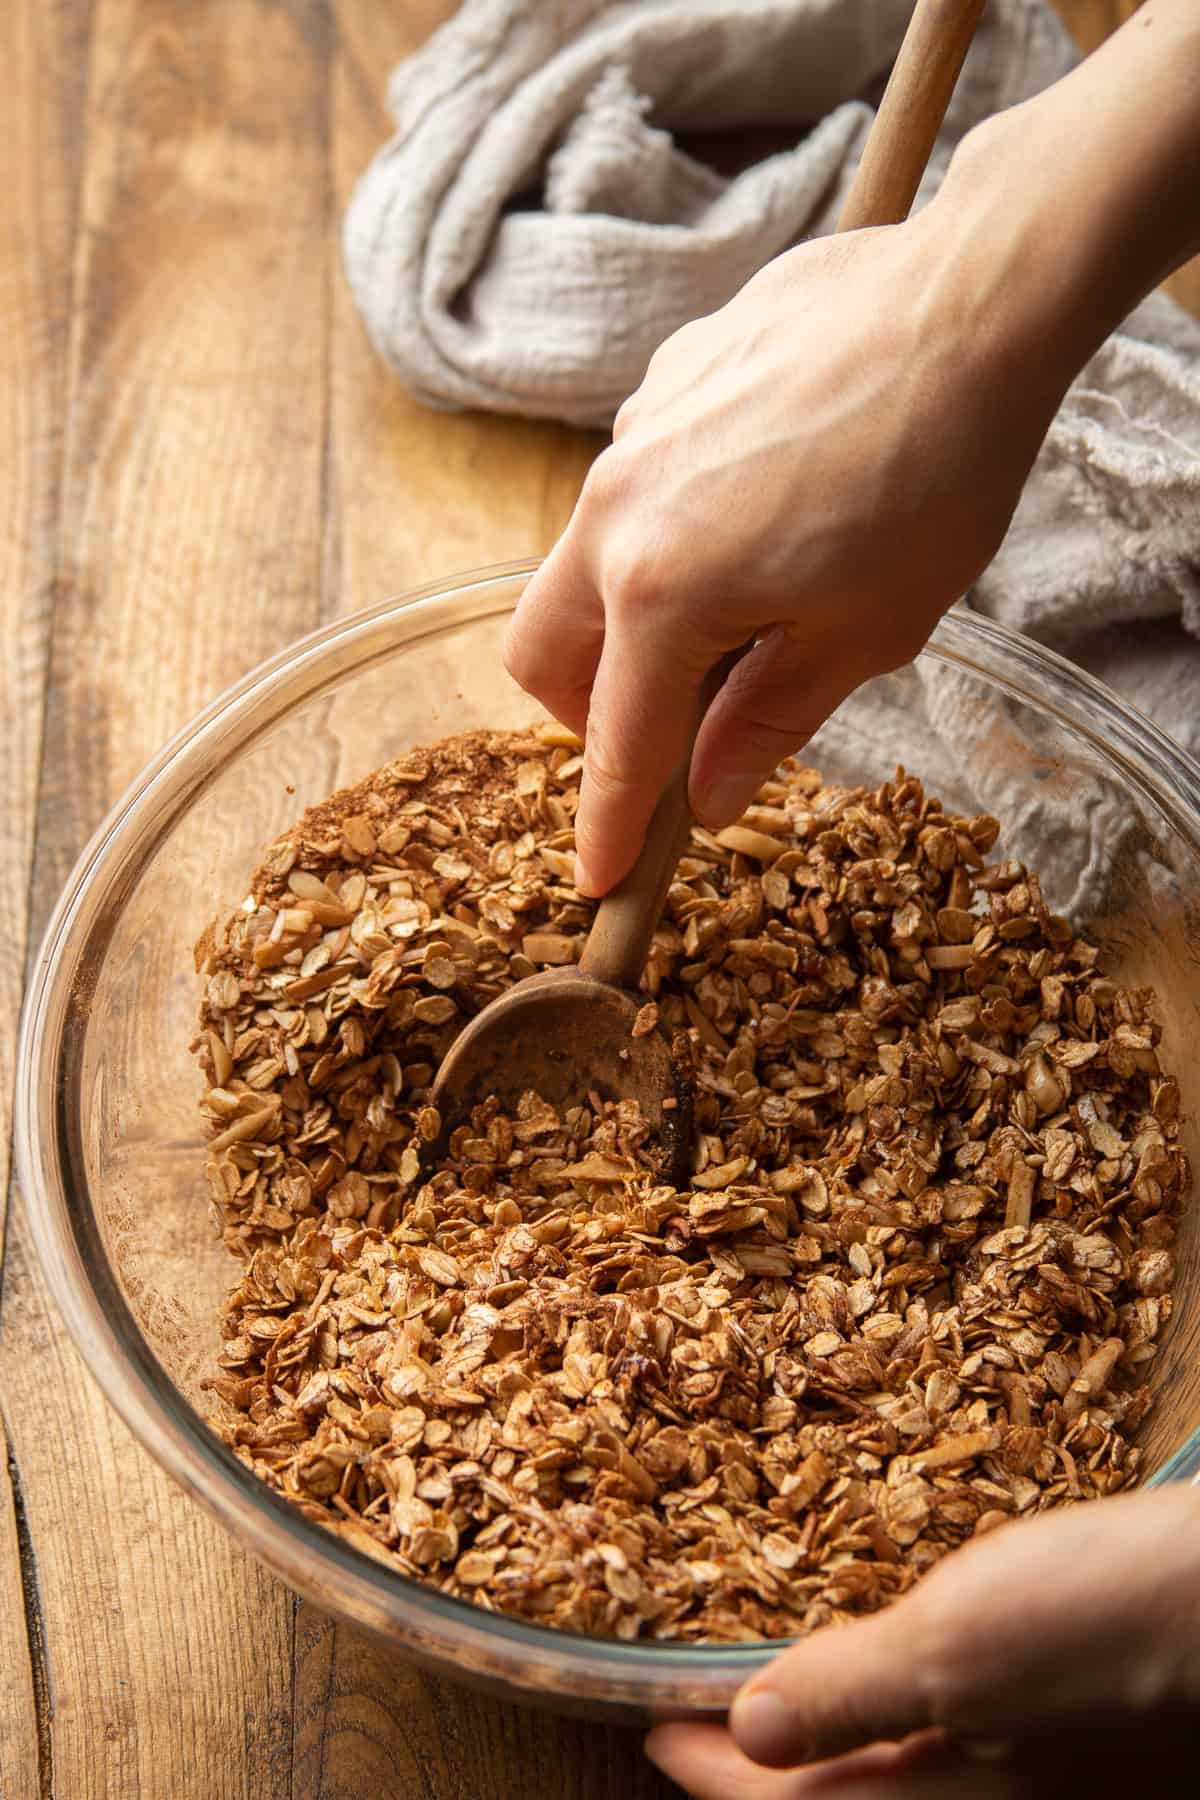 Hand stirring Chocolate Granola ingredients together in a bowl.